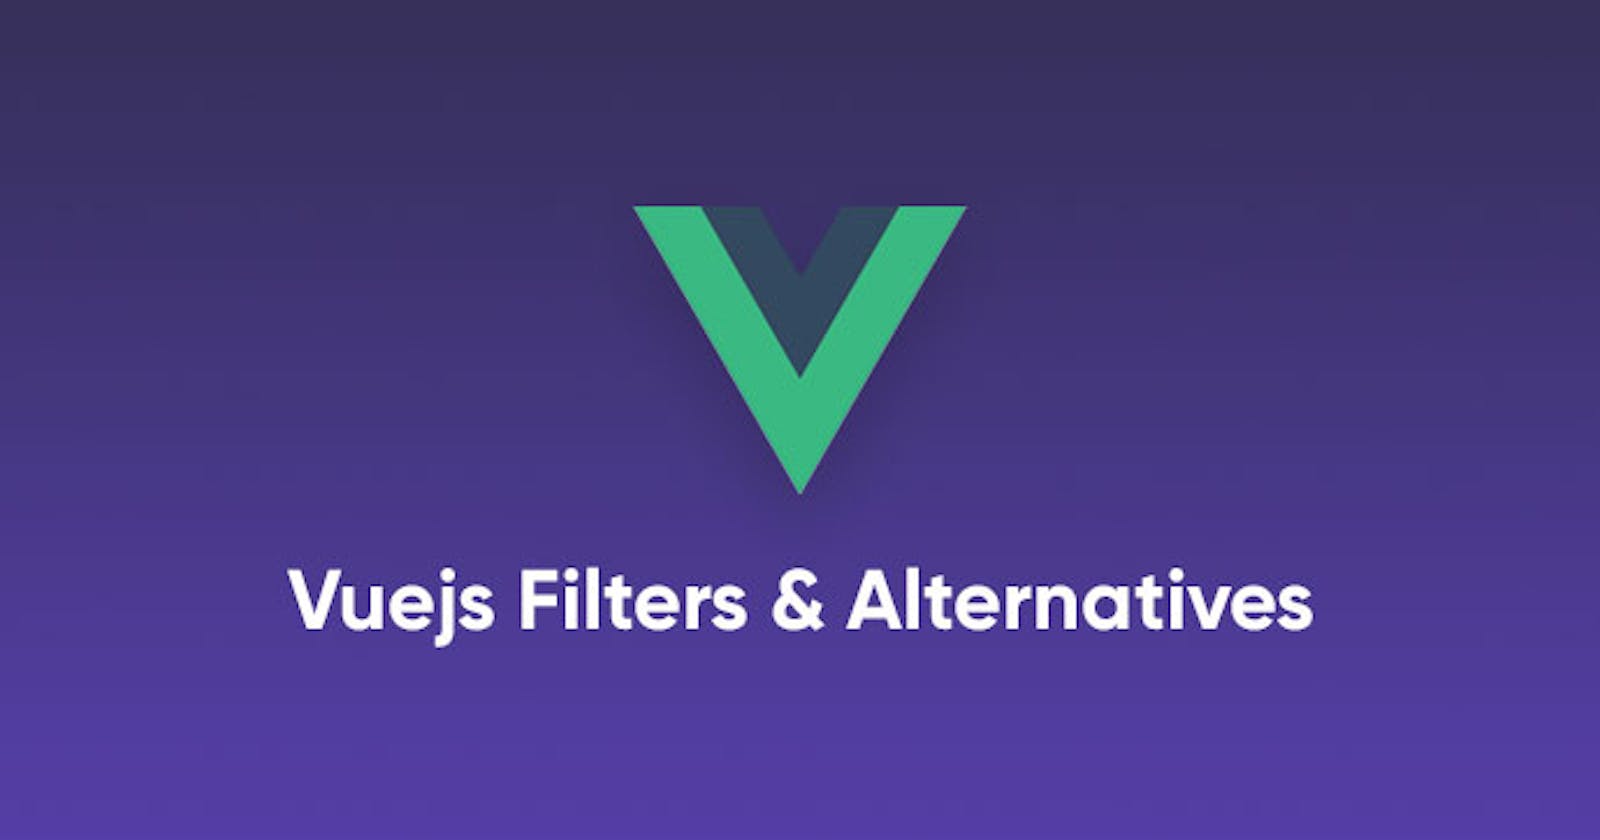 Improving Vuejs Apps with Vue Filters and its Alternative (Vue Computed Properties)